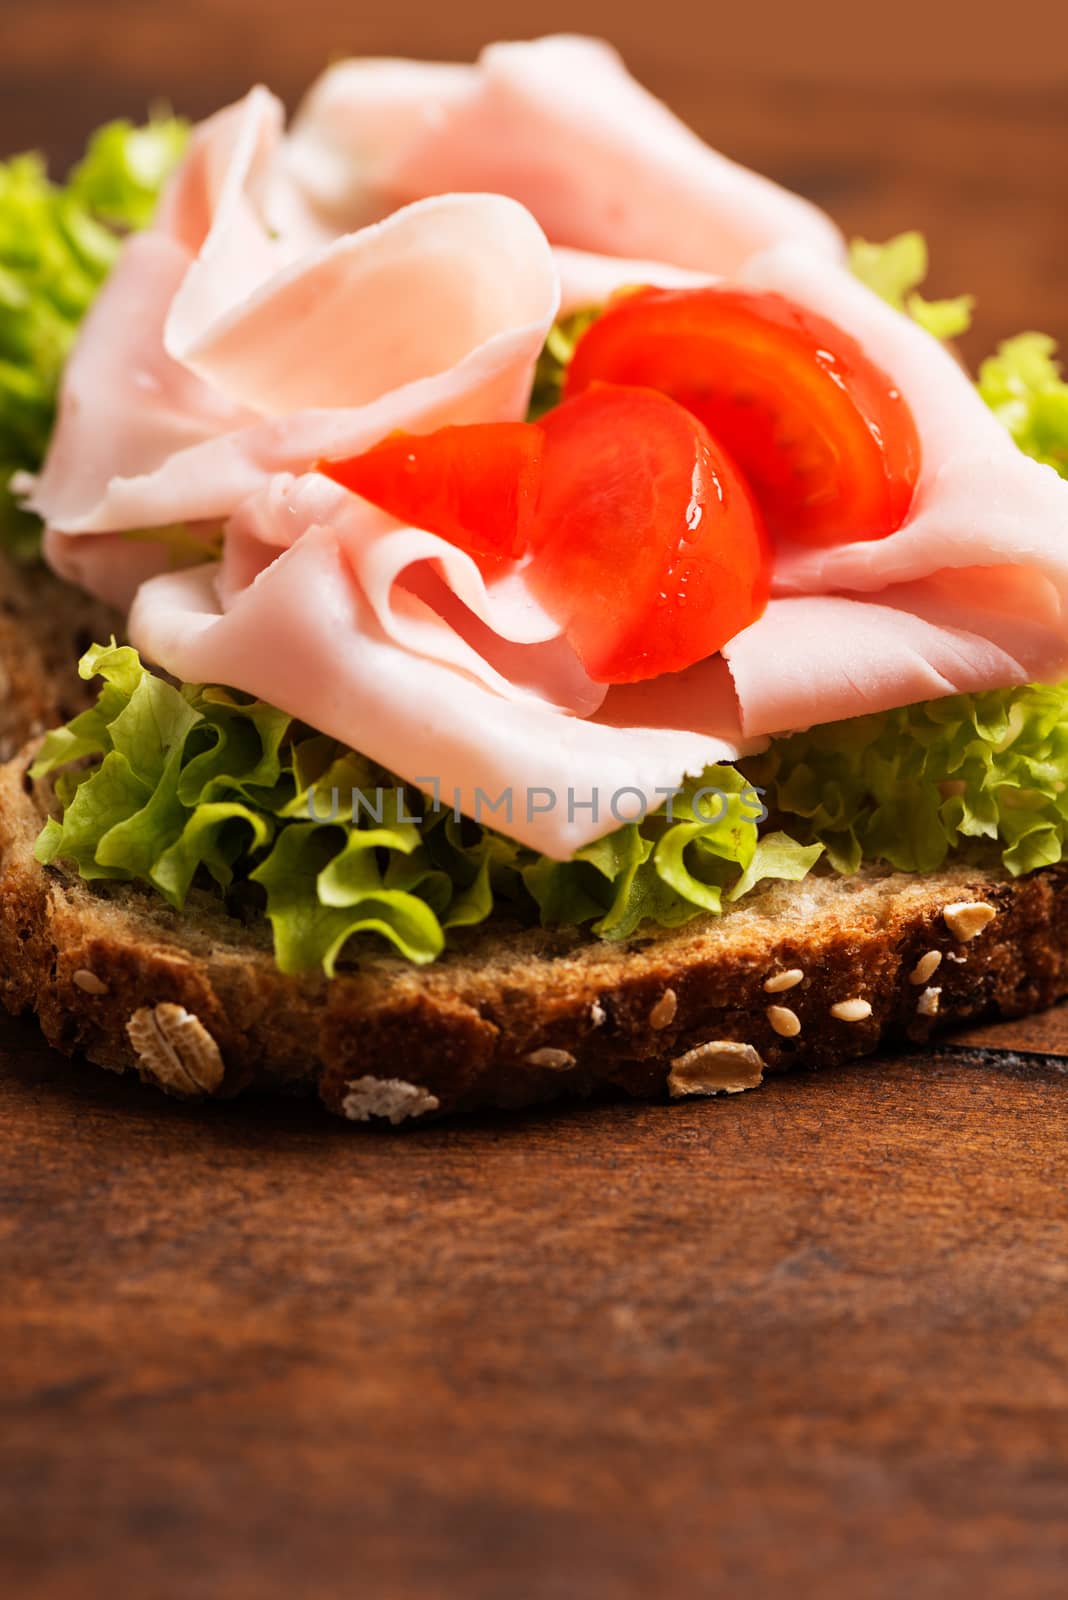 Ham sandwich composition with tomato on wooden table